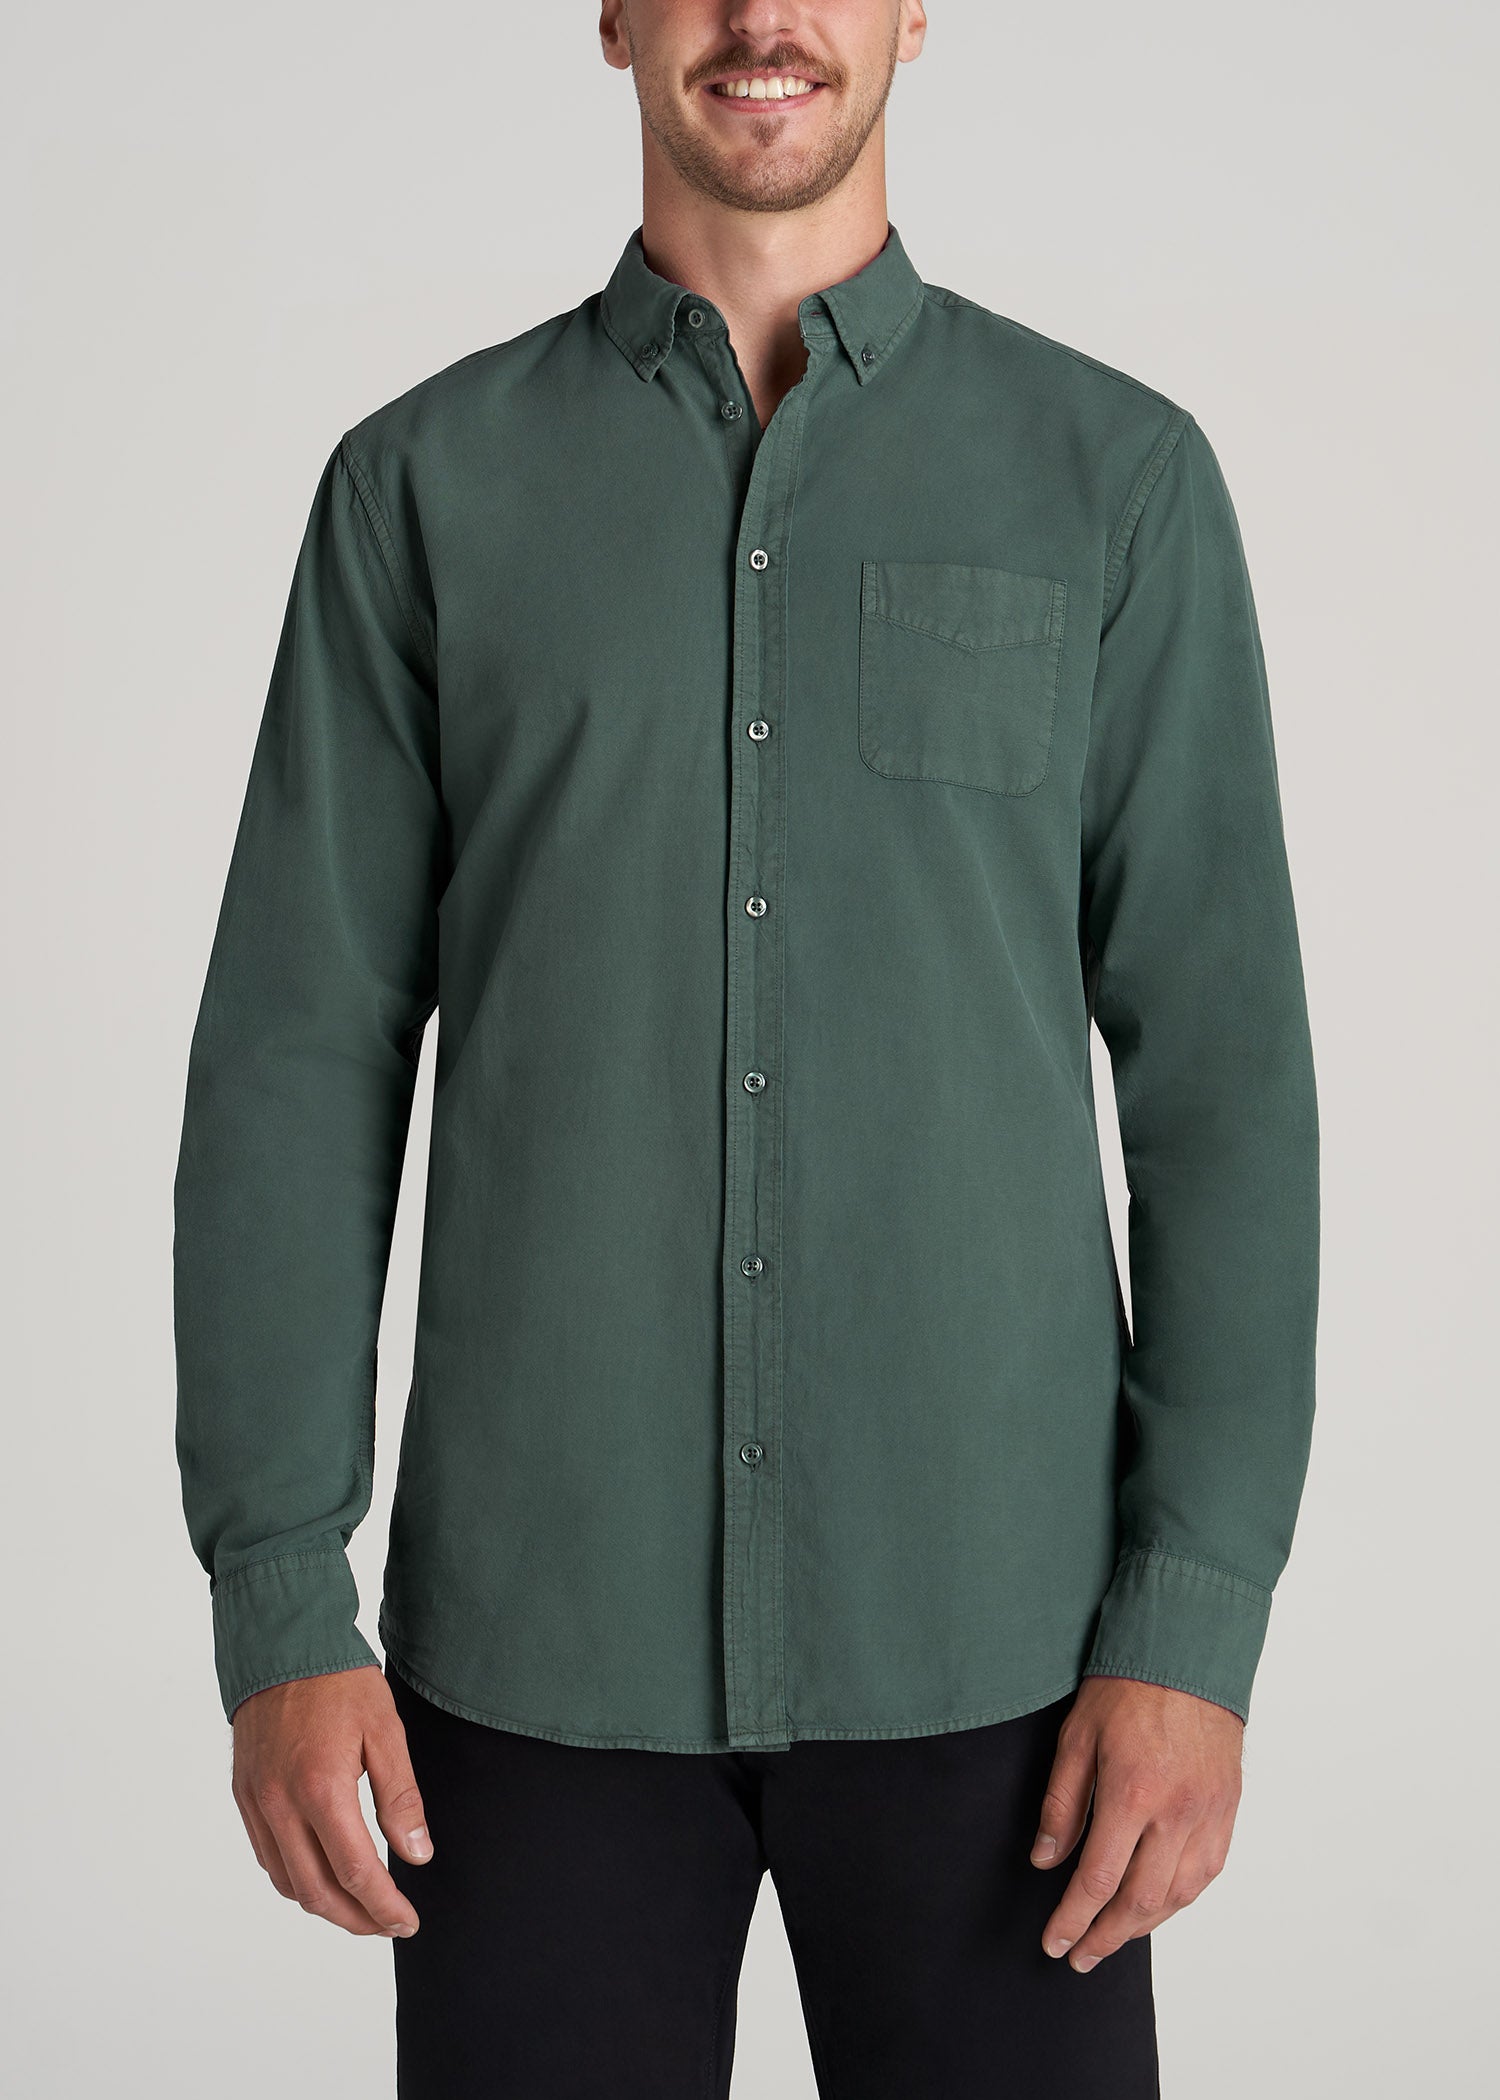 Washed Oxford Shirt for Tall Men in Timber Green S / Tall / Timber Green